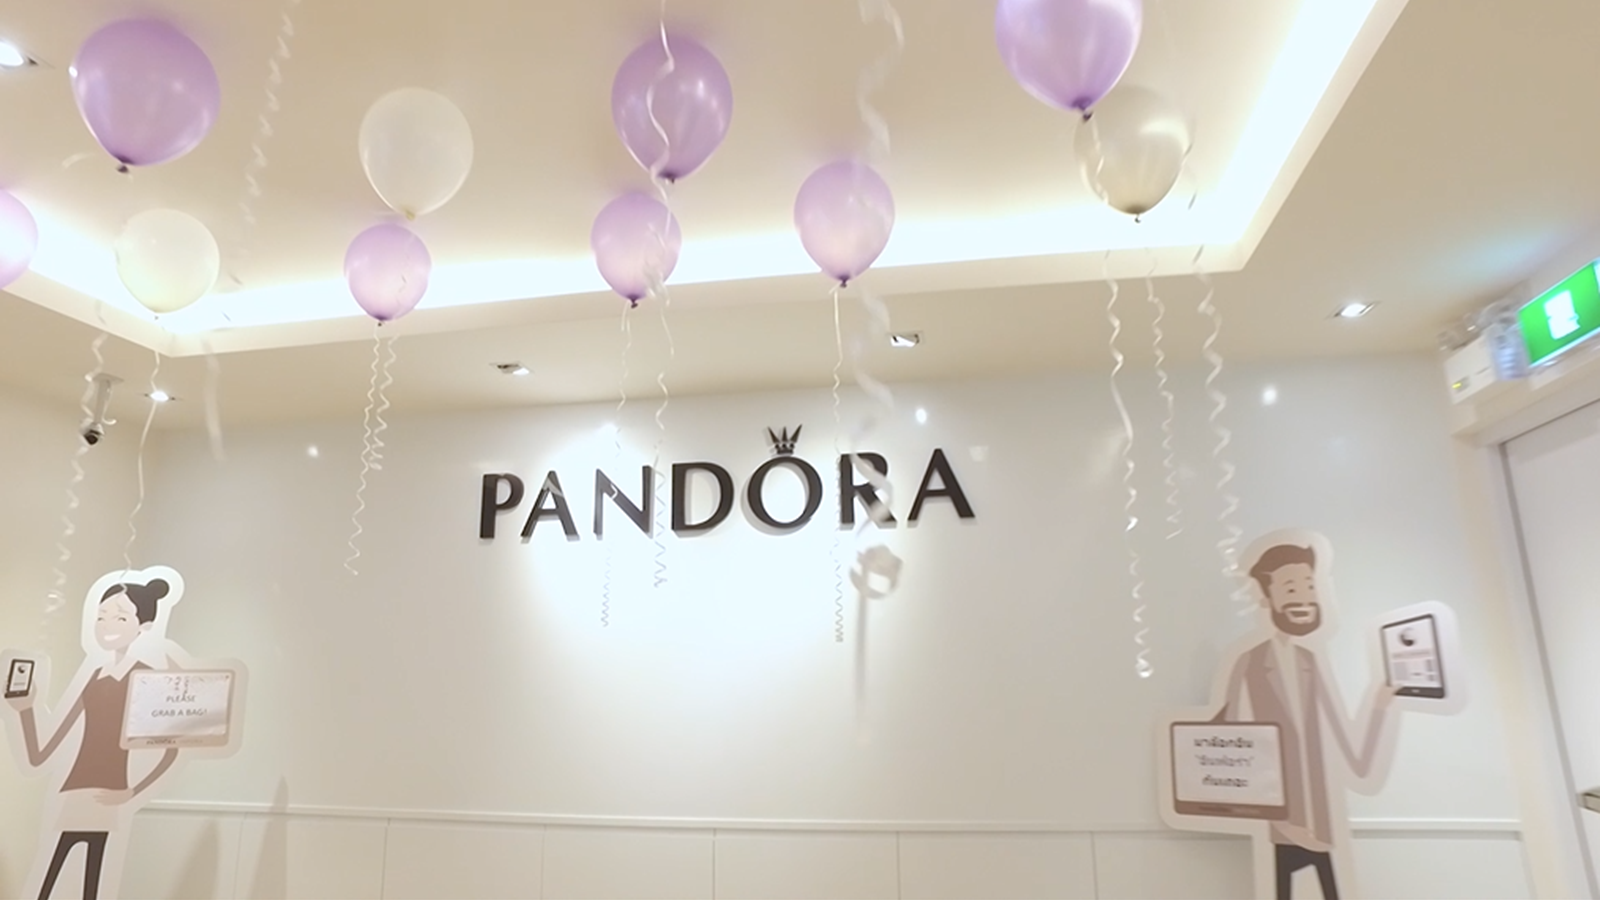 PANDORA shortlisted for two awards